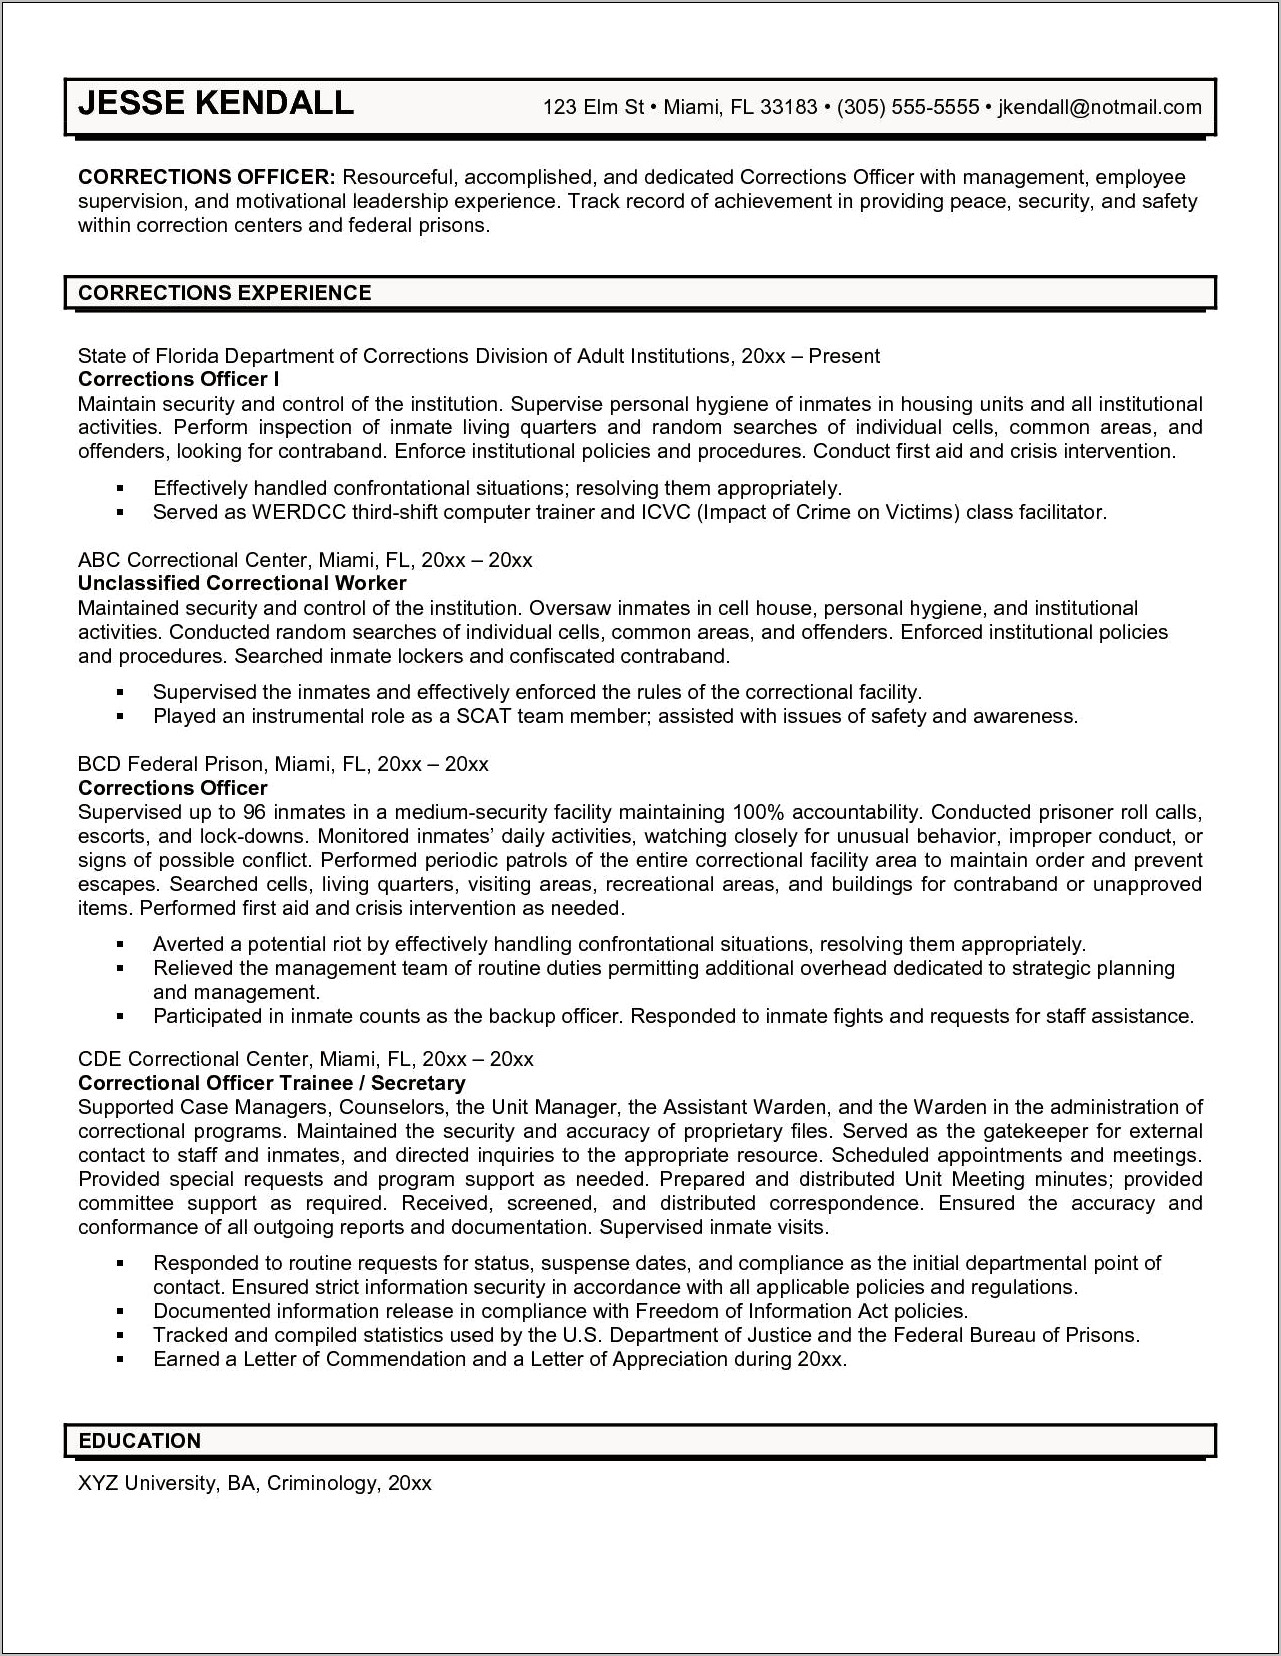 Public Service Officer Objective For Resume